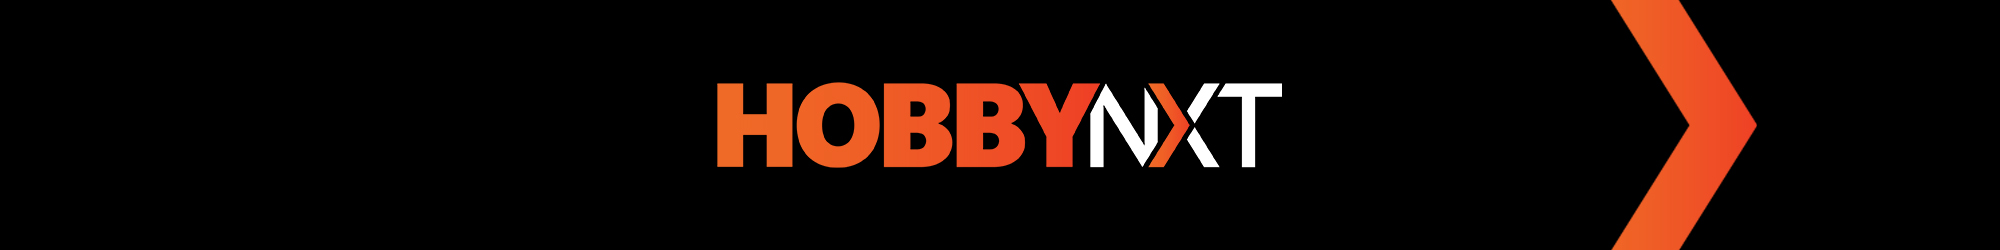 Hobby_Next-PAGE_BANNER